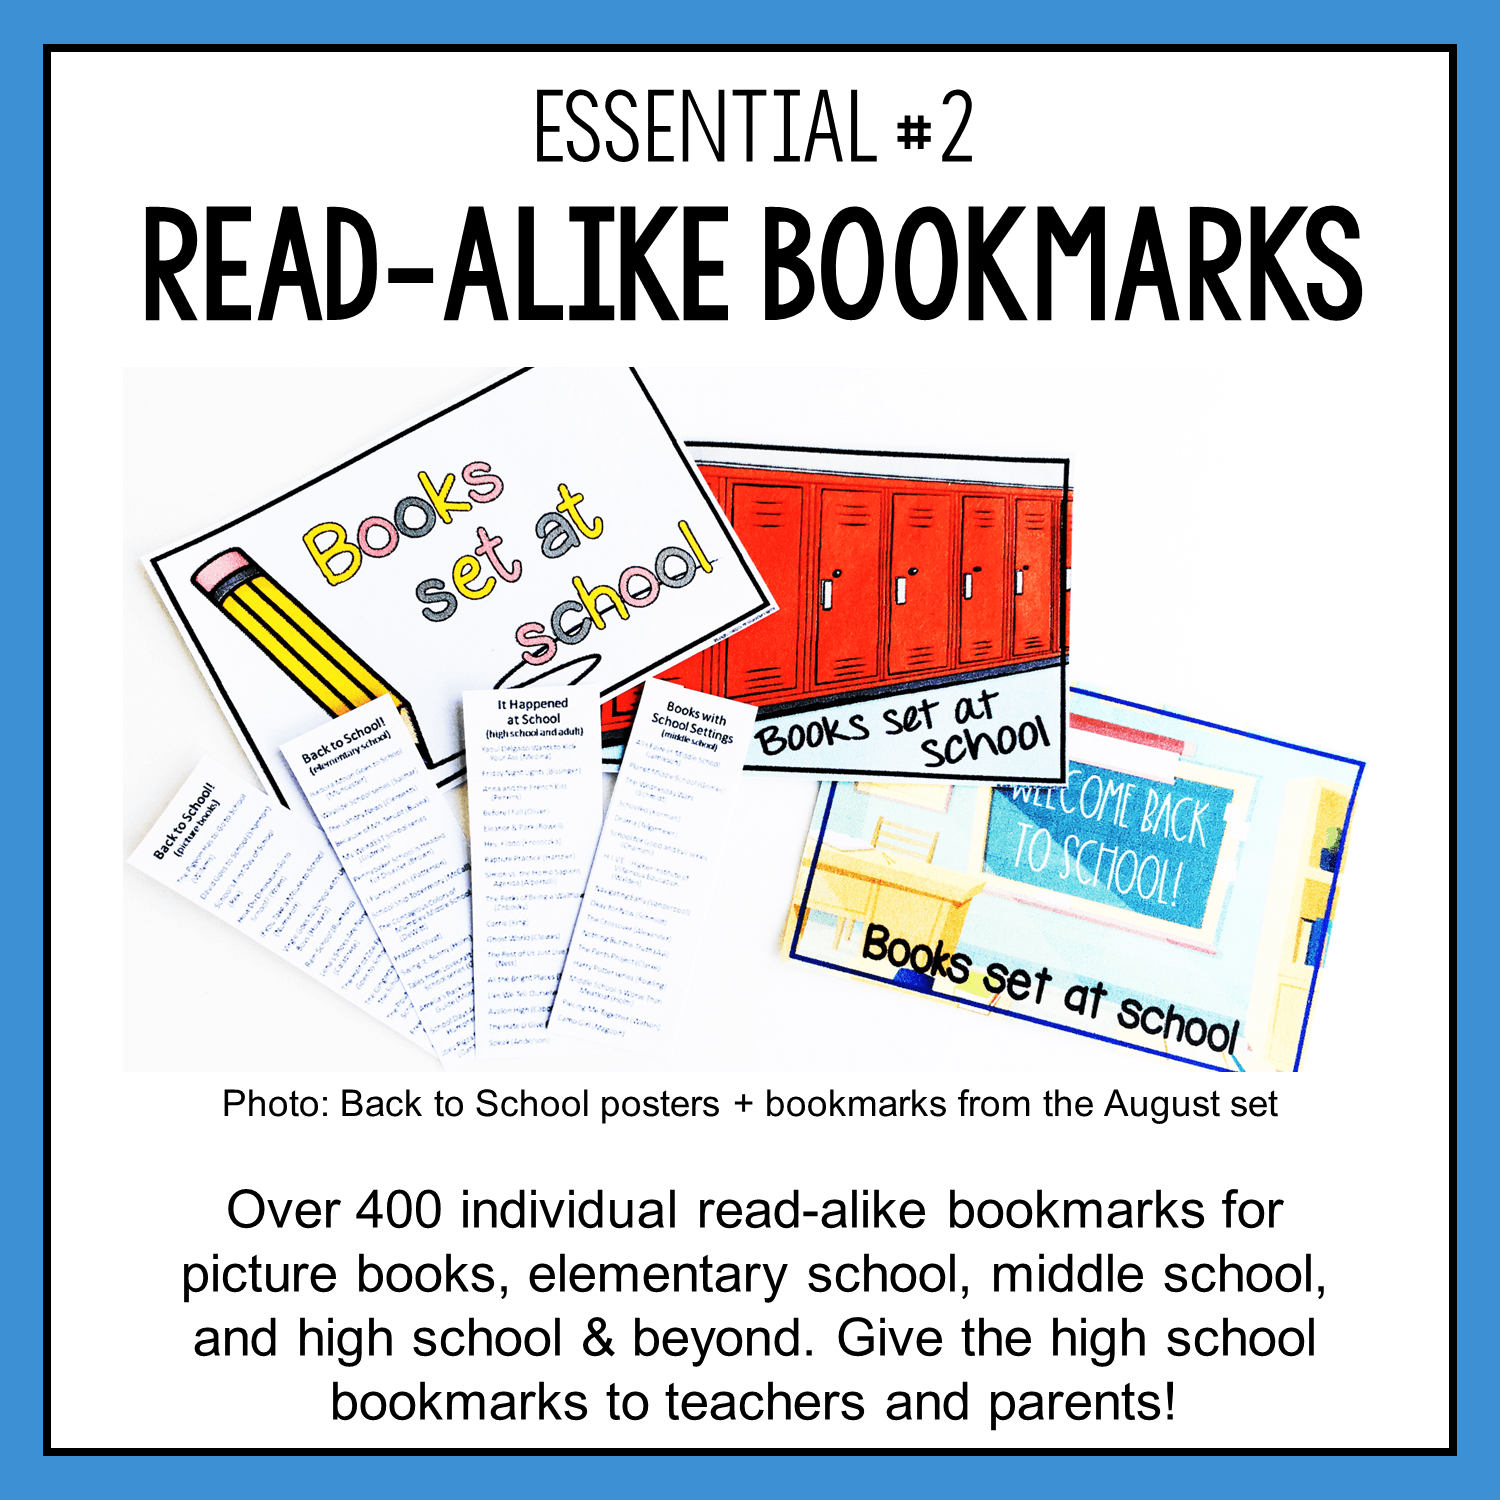 This Elementary Library Back to School Bundle includes 436 read-alike bookmarks for over 100 genre and seasonal themes.